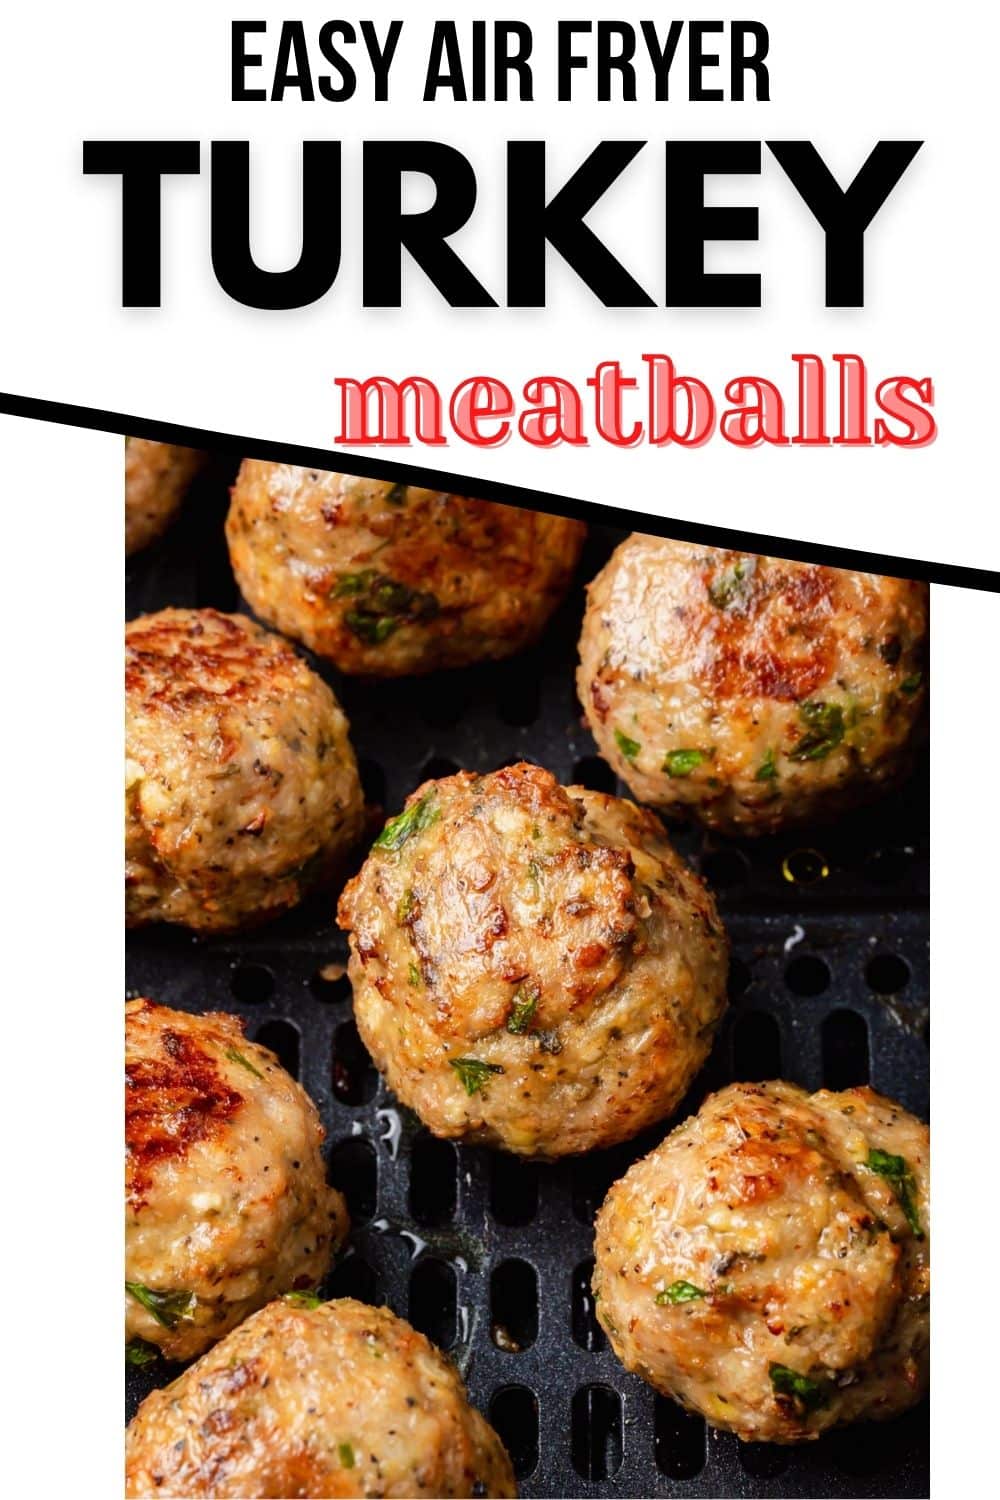 Air Fryer Turkey Meatballs are a healthier alternative to beef meatballs, packed with delicious flavor and ready in 20 minutes in the Air Fryer. #airfryer #turkeymeatballs via @vegetarianmamma